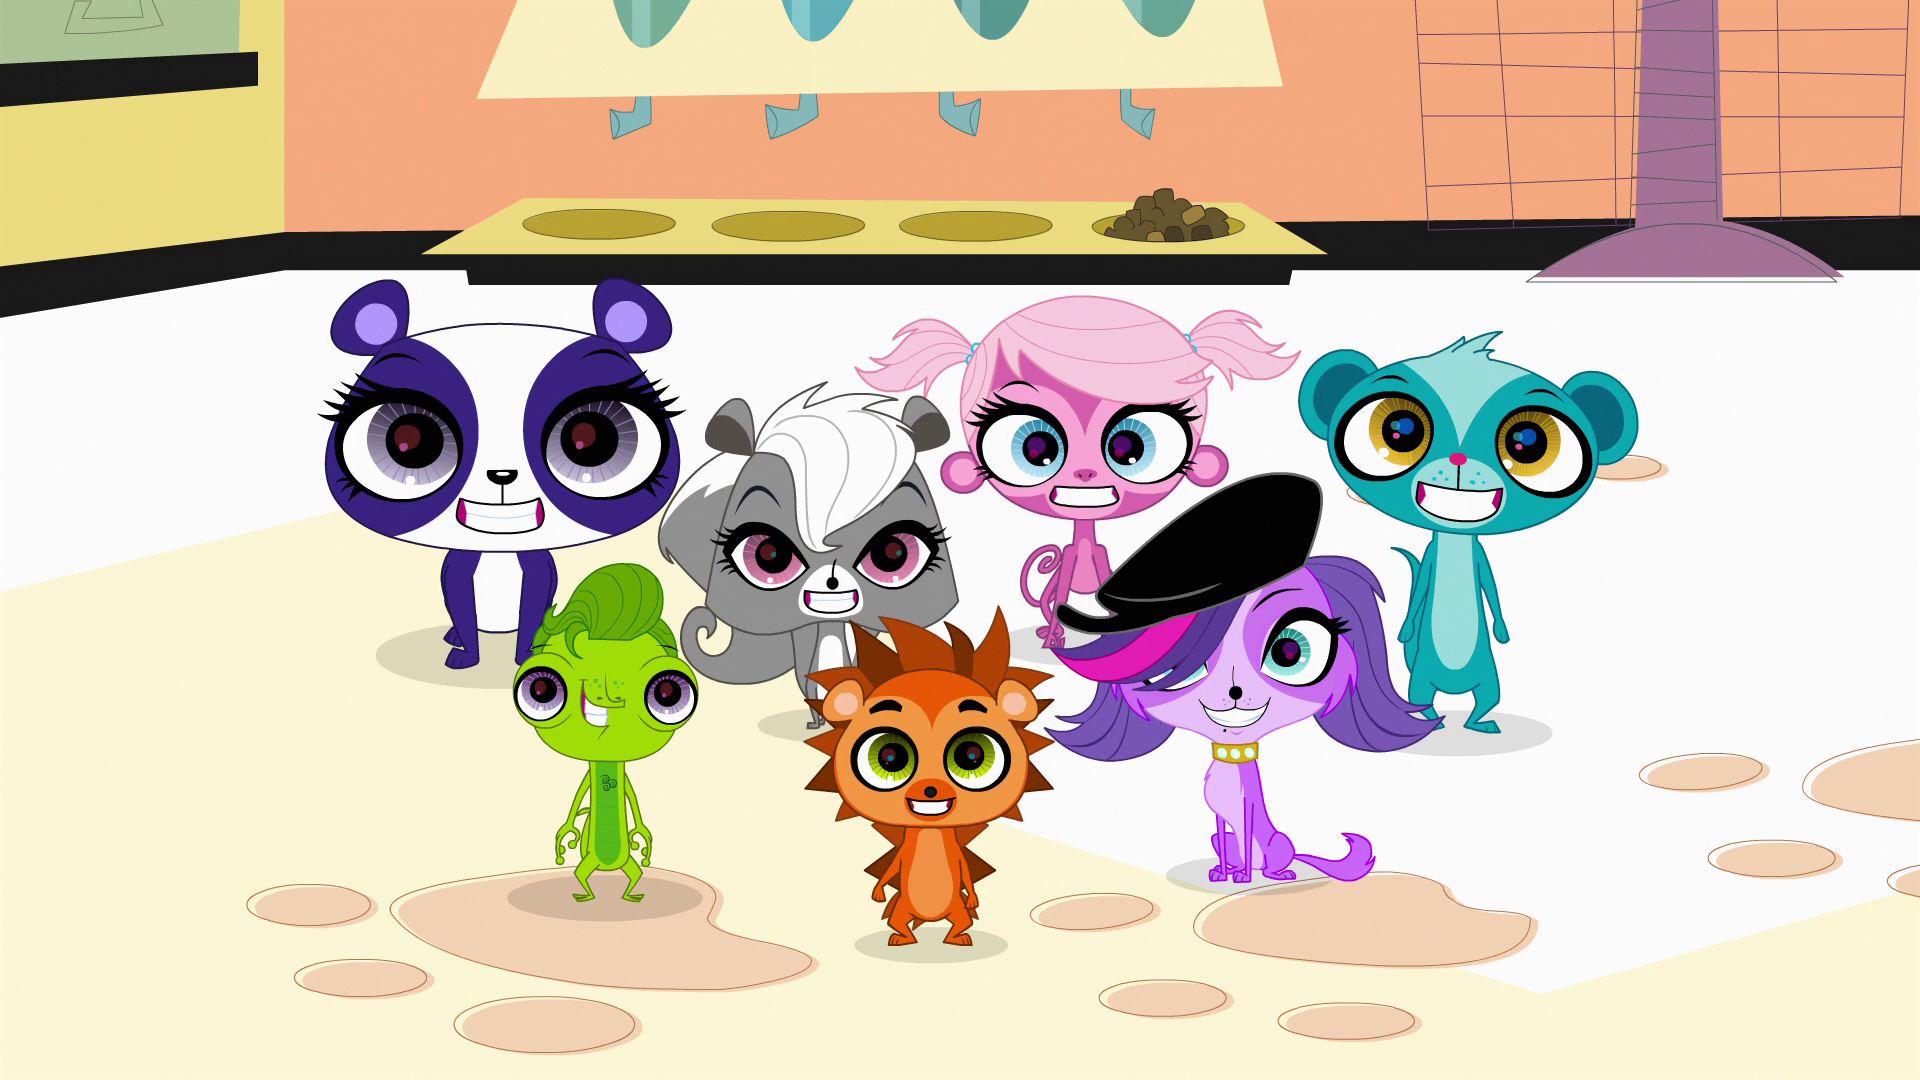 image-smiling-pets-png-littlest-pet-shop-2012-tv-series-wiki-fandom-powered-by-wikia